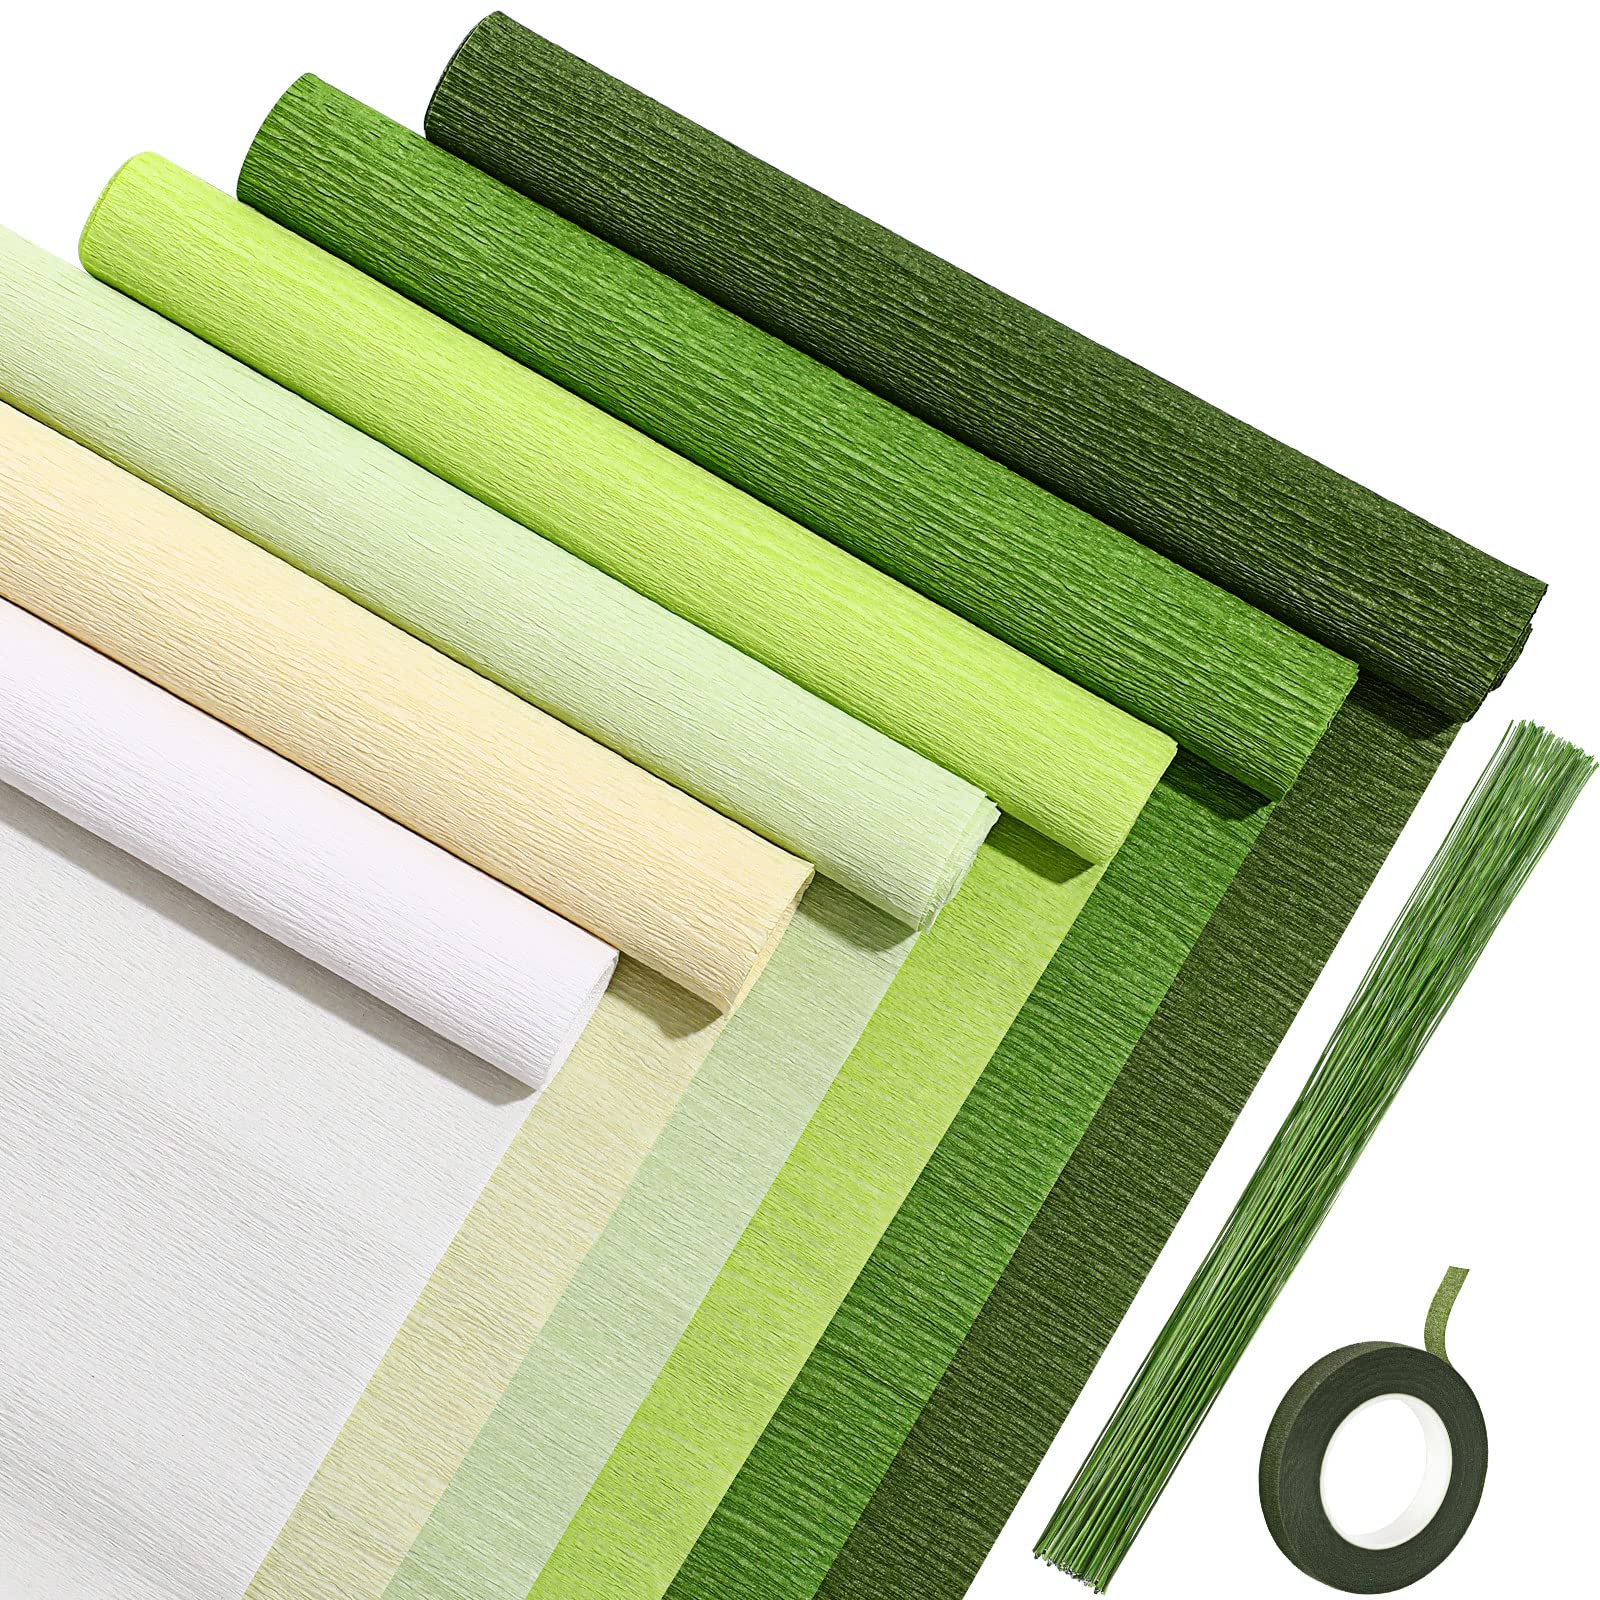 Crepe Paper Flower DIY Kit, 6pcs 35g Crepe Papel Rolls with Green Floral  Tape and 50pcs Floral Iron Wires for Crafting Wedding Birthday Party  Festival